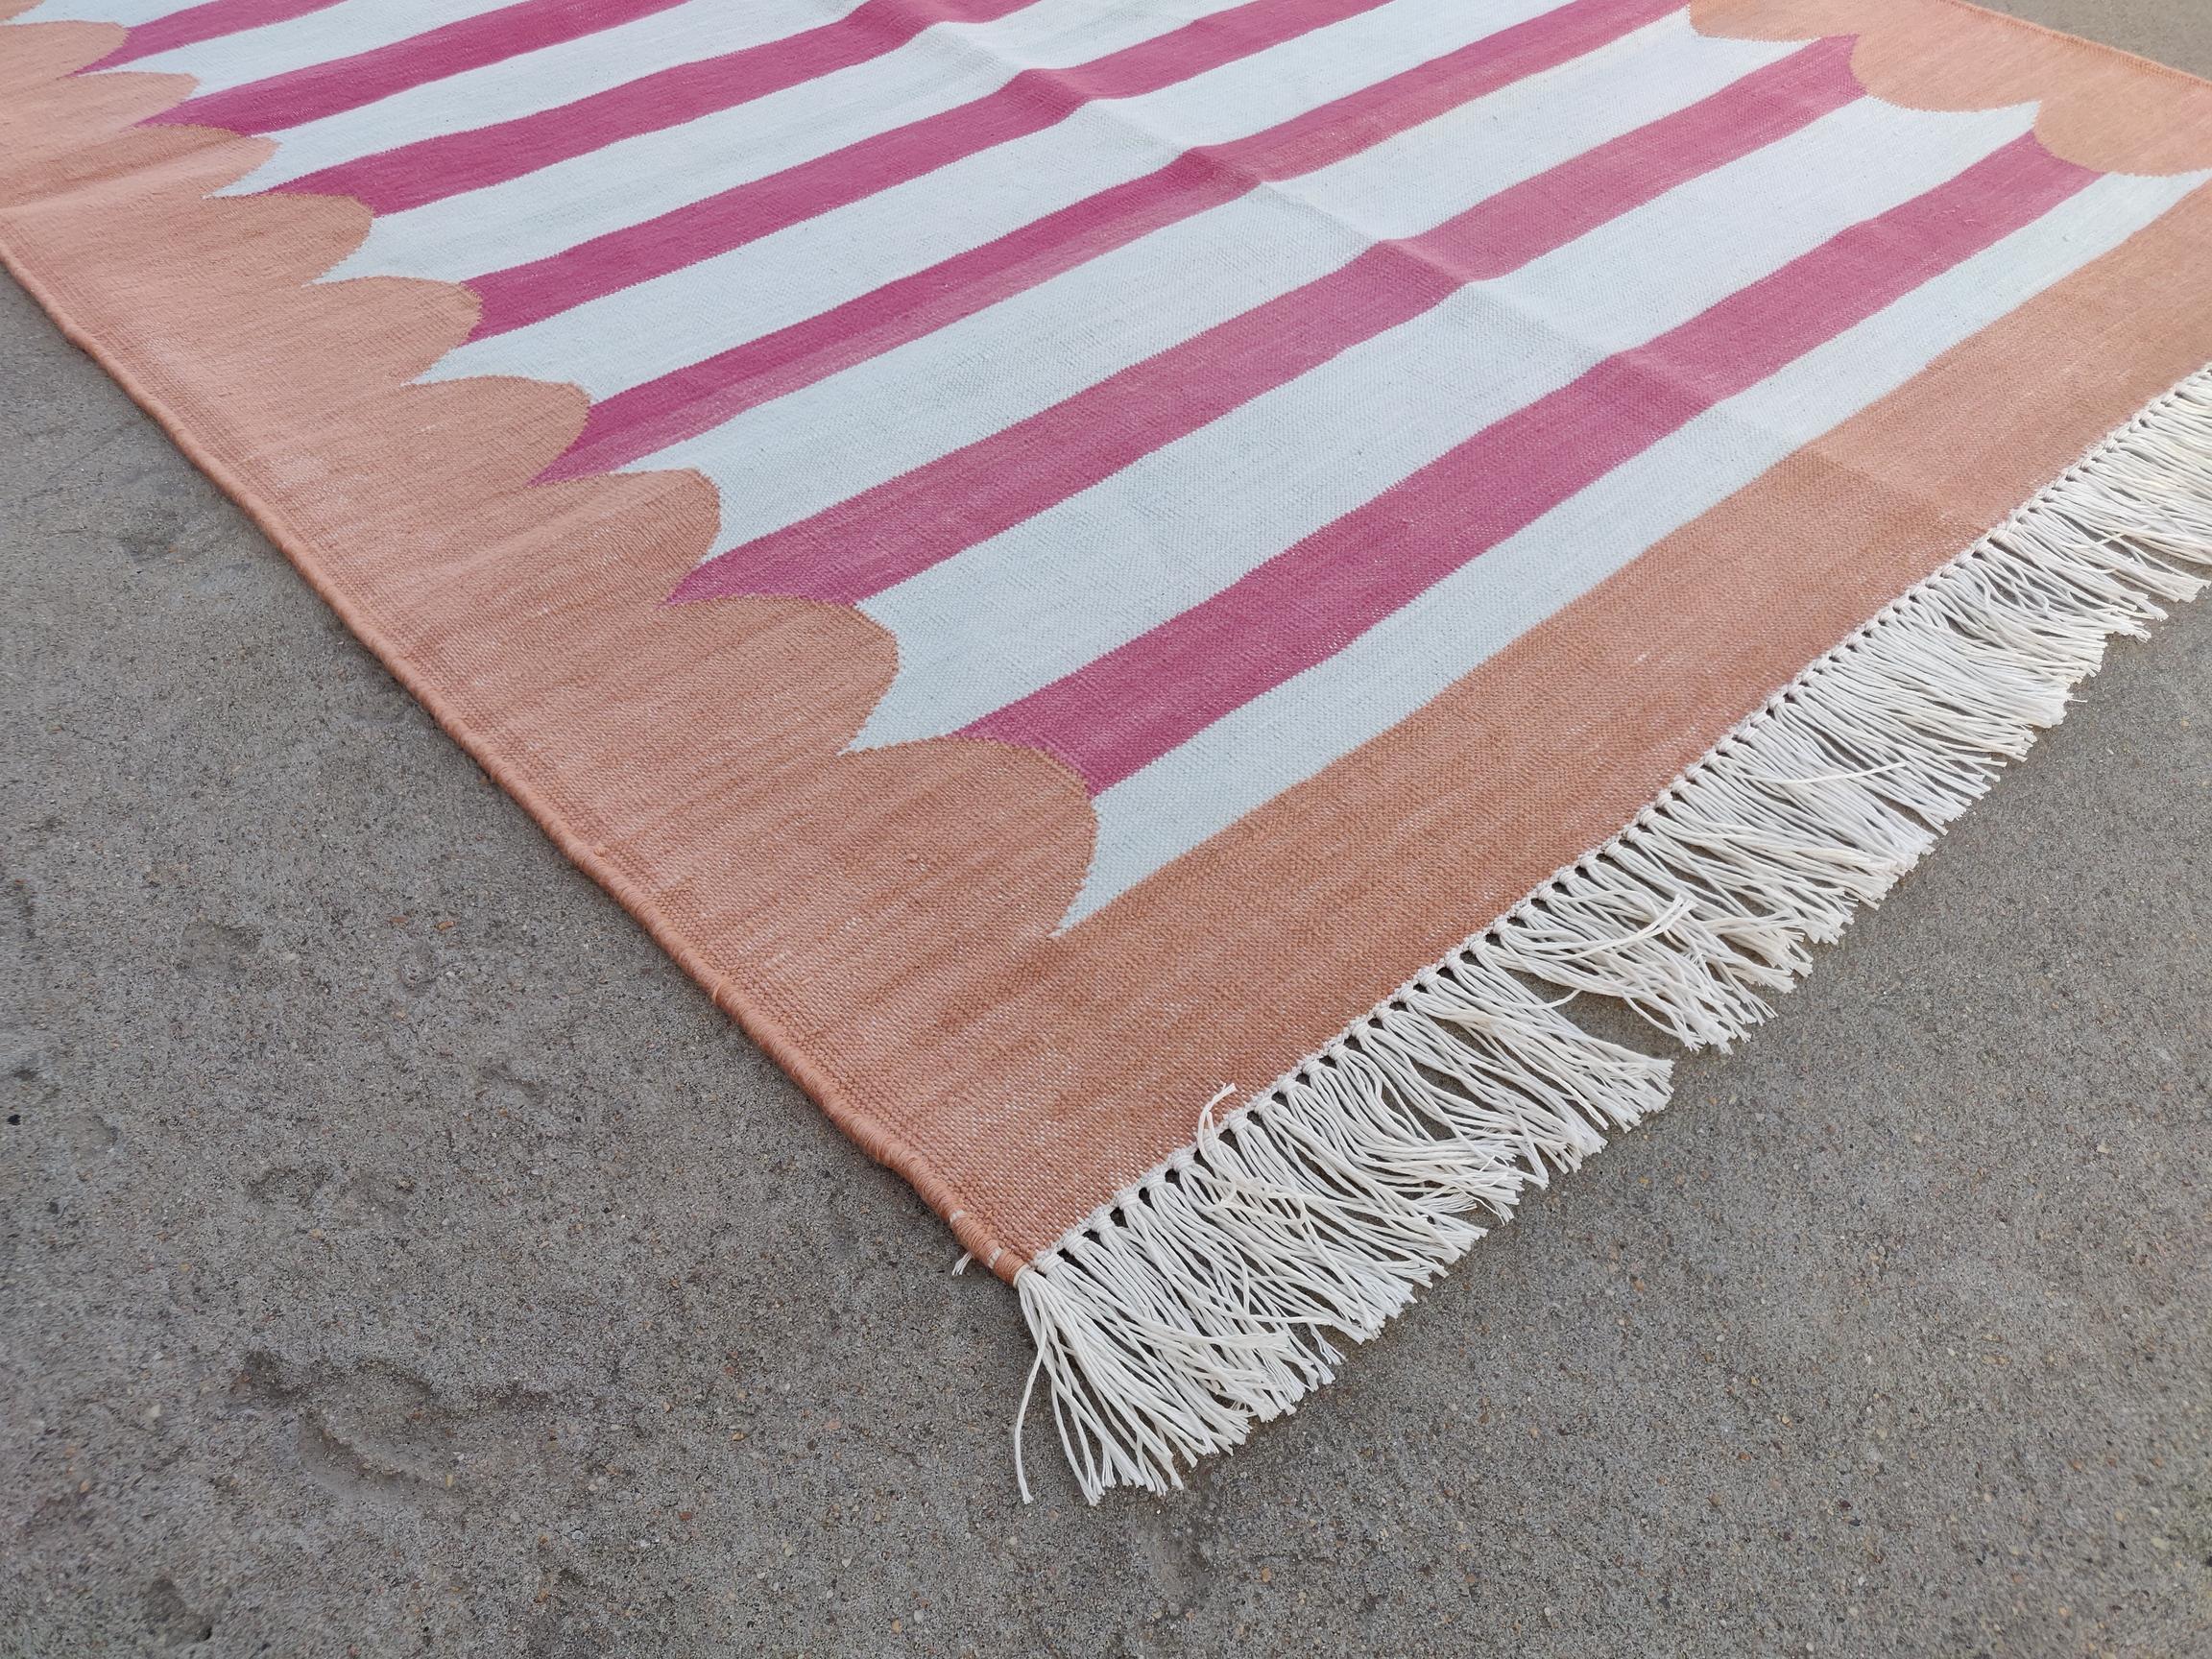 Cotton Vegetable Dyed Pink And Tan Scalloped Striped Indian Dhurrie Rug-3'x5' 
These special flat-weave dhurries are hand-woven with 15 ply 100% cotton yarn. Due to the special manufacturing techniques used to create our rugs, the size and color of